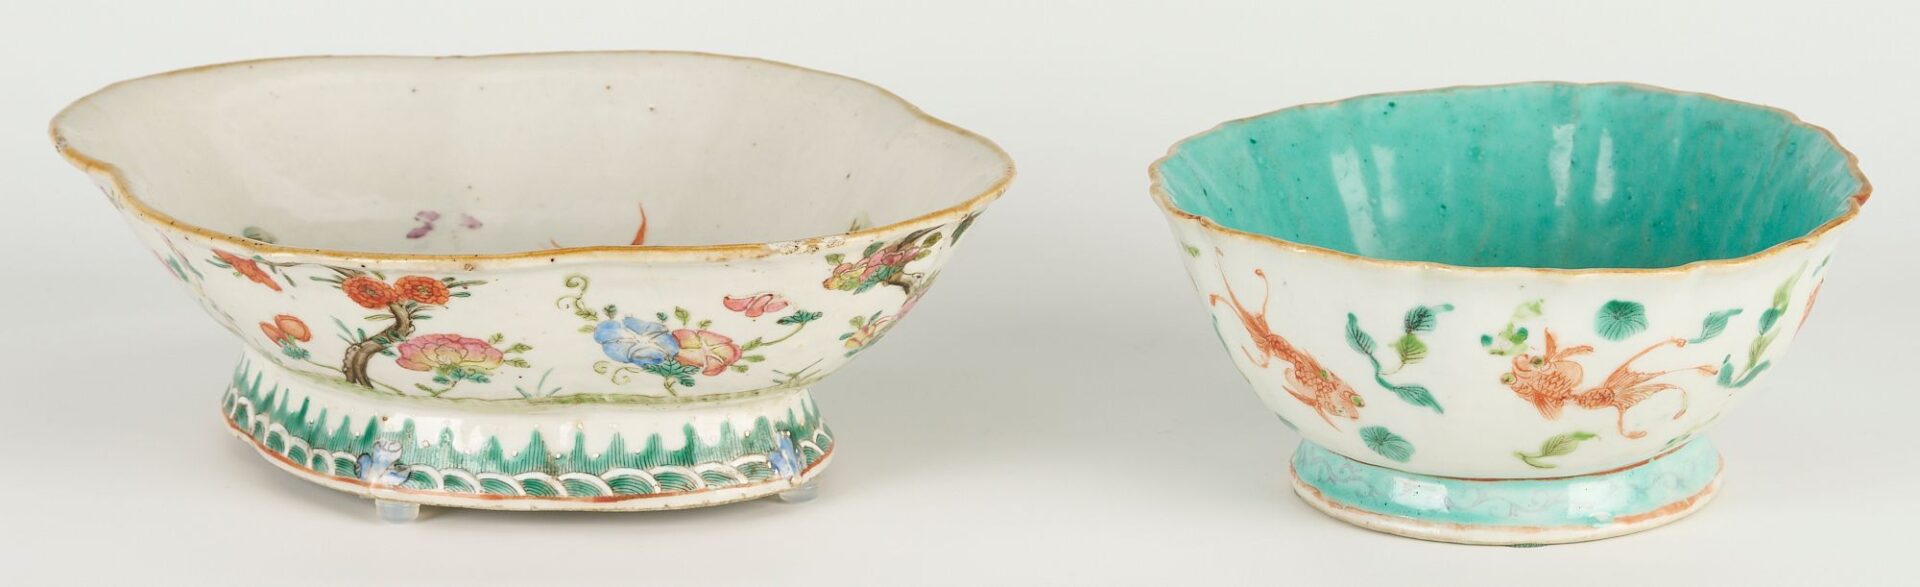 Lot 881: 4 Chinese Famille Rose Porcelain Items